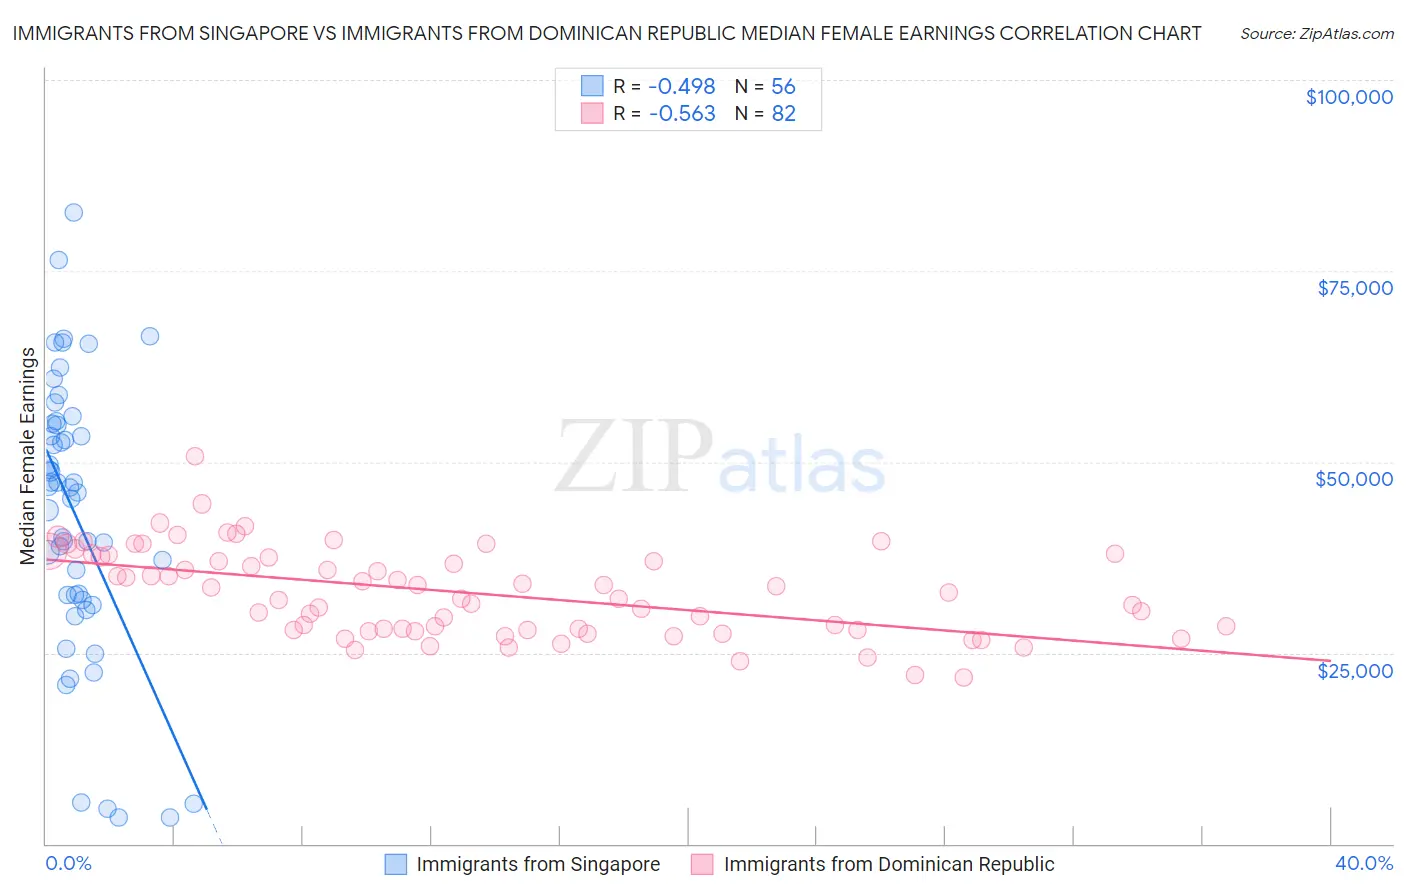 Immigrants from Singapore vs Immigrants from Dominican Republic Median Female Earnings